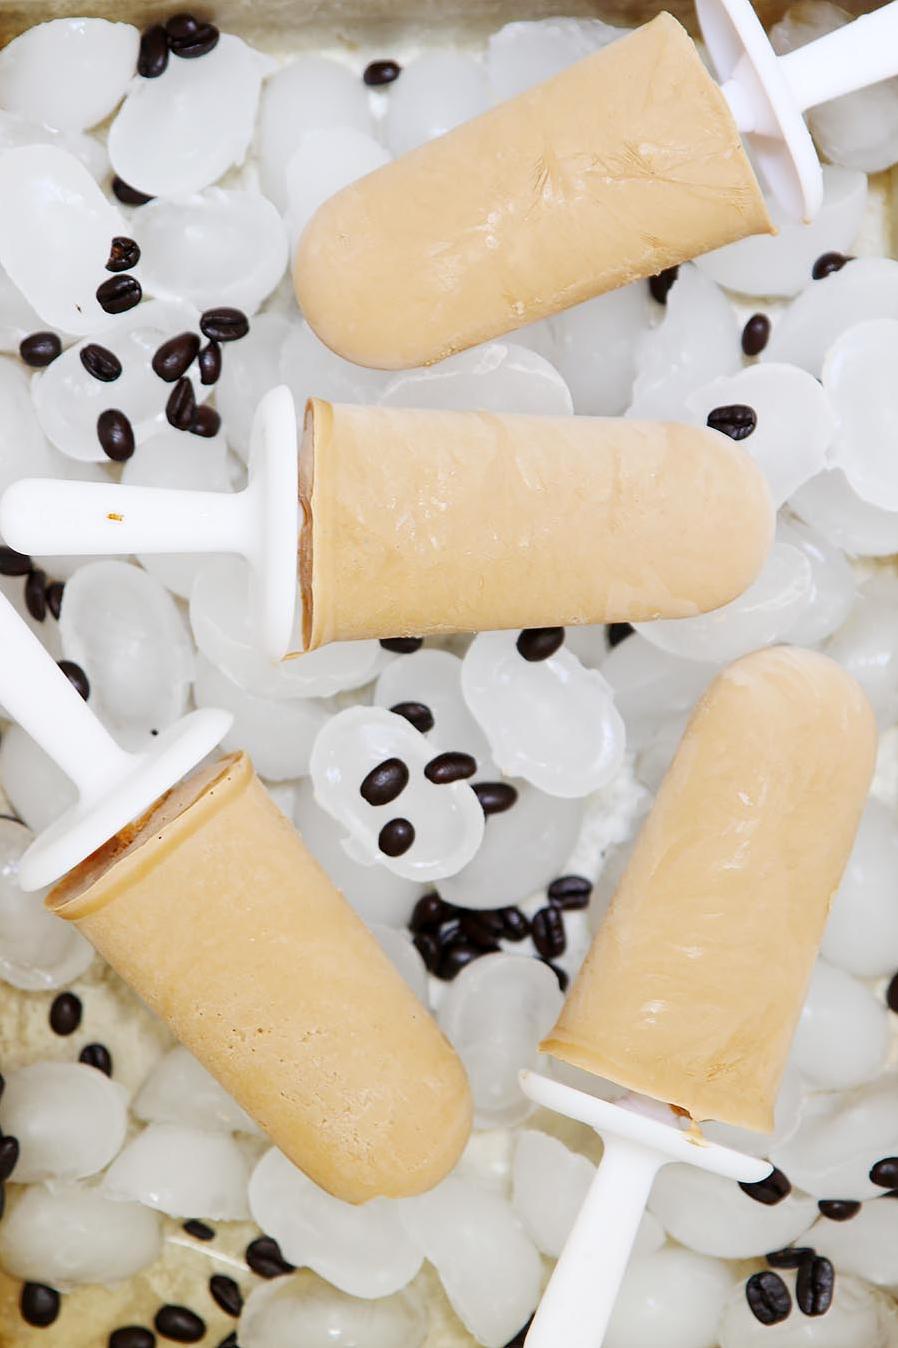  Keep your taste buds cool and your spirits high with our coffee popsicles.